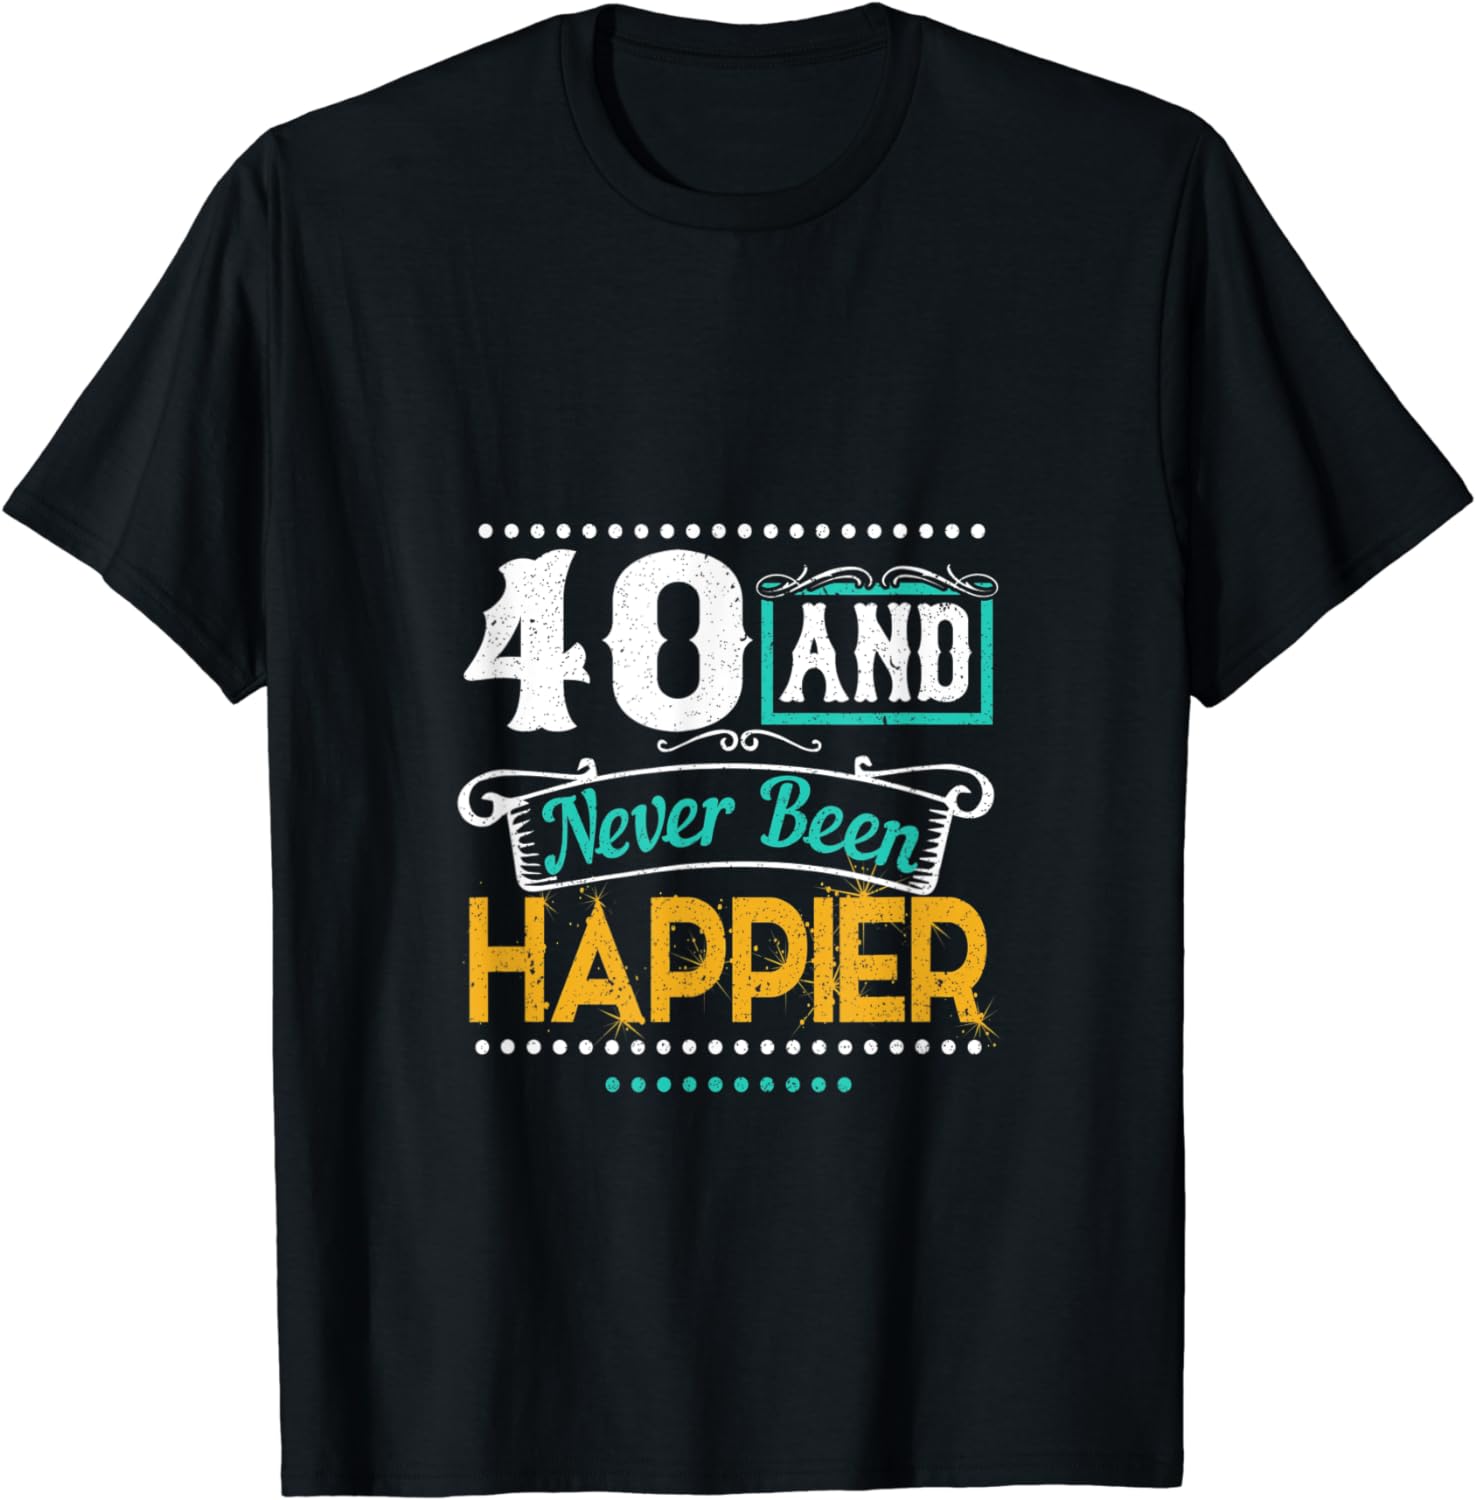 40 and Never Been Happier T-Shirt